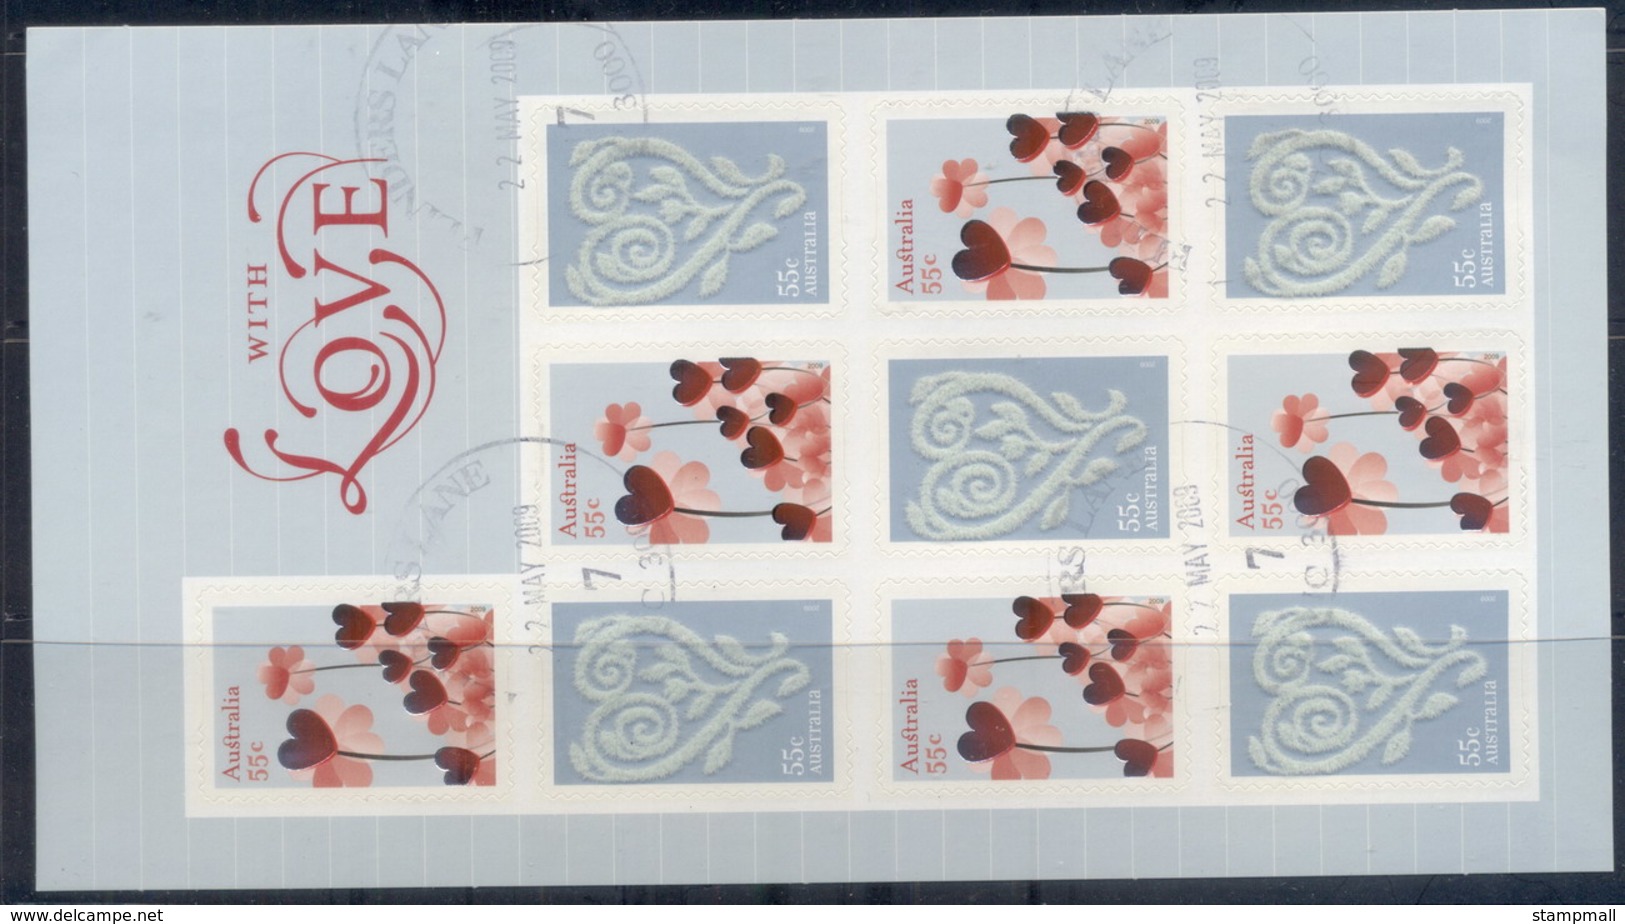 Australia 2009 With Love P&S Sheetlet FU - Mint Stamps